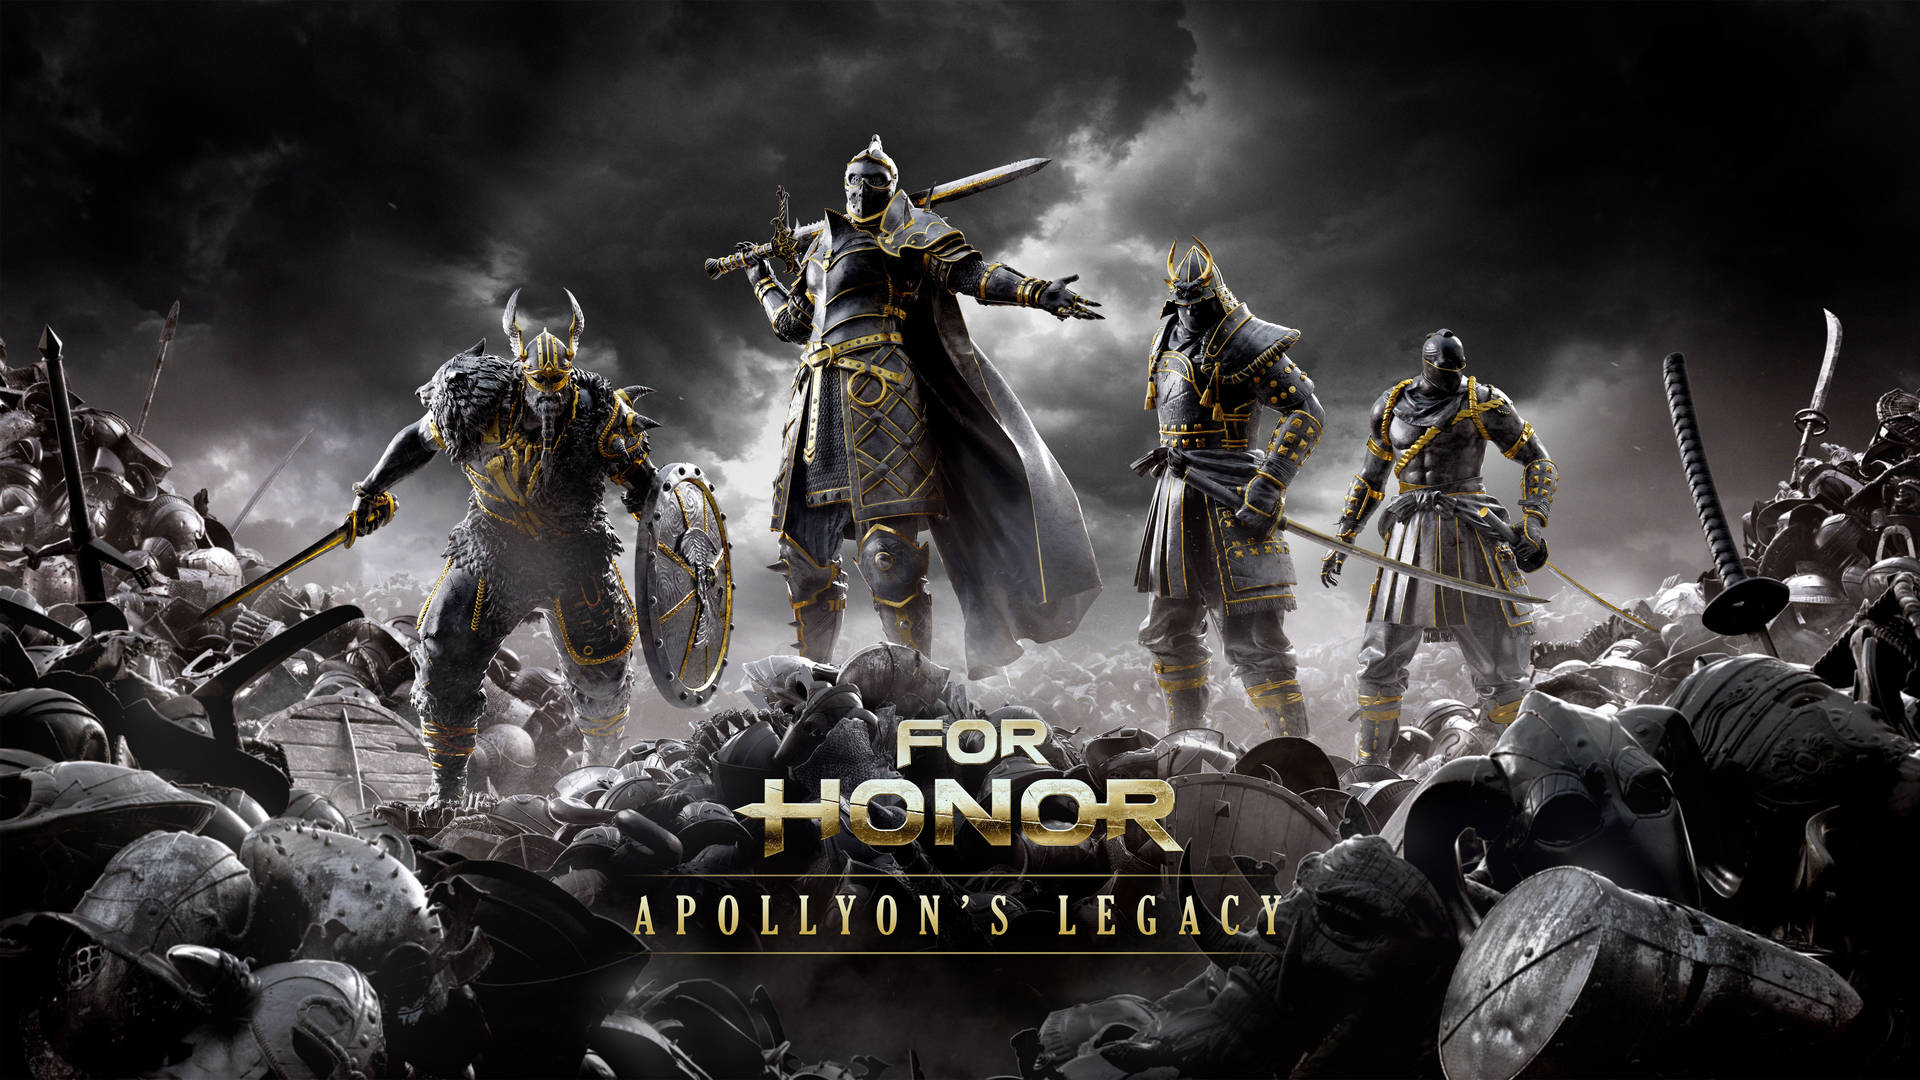 Fight for your honor Wallpaper